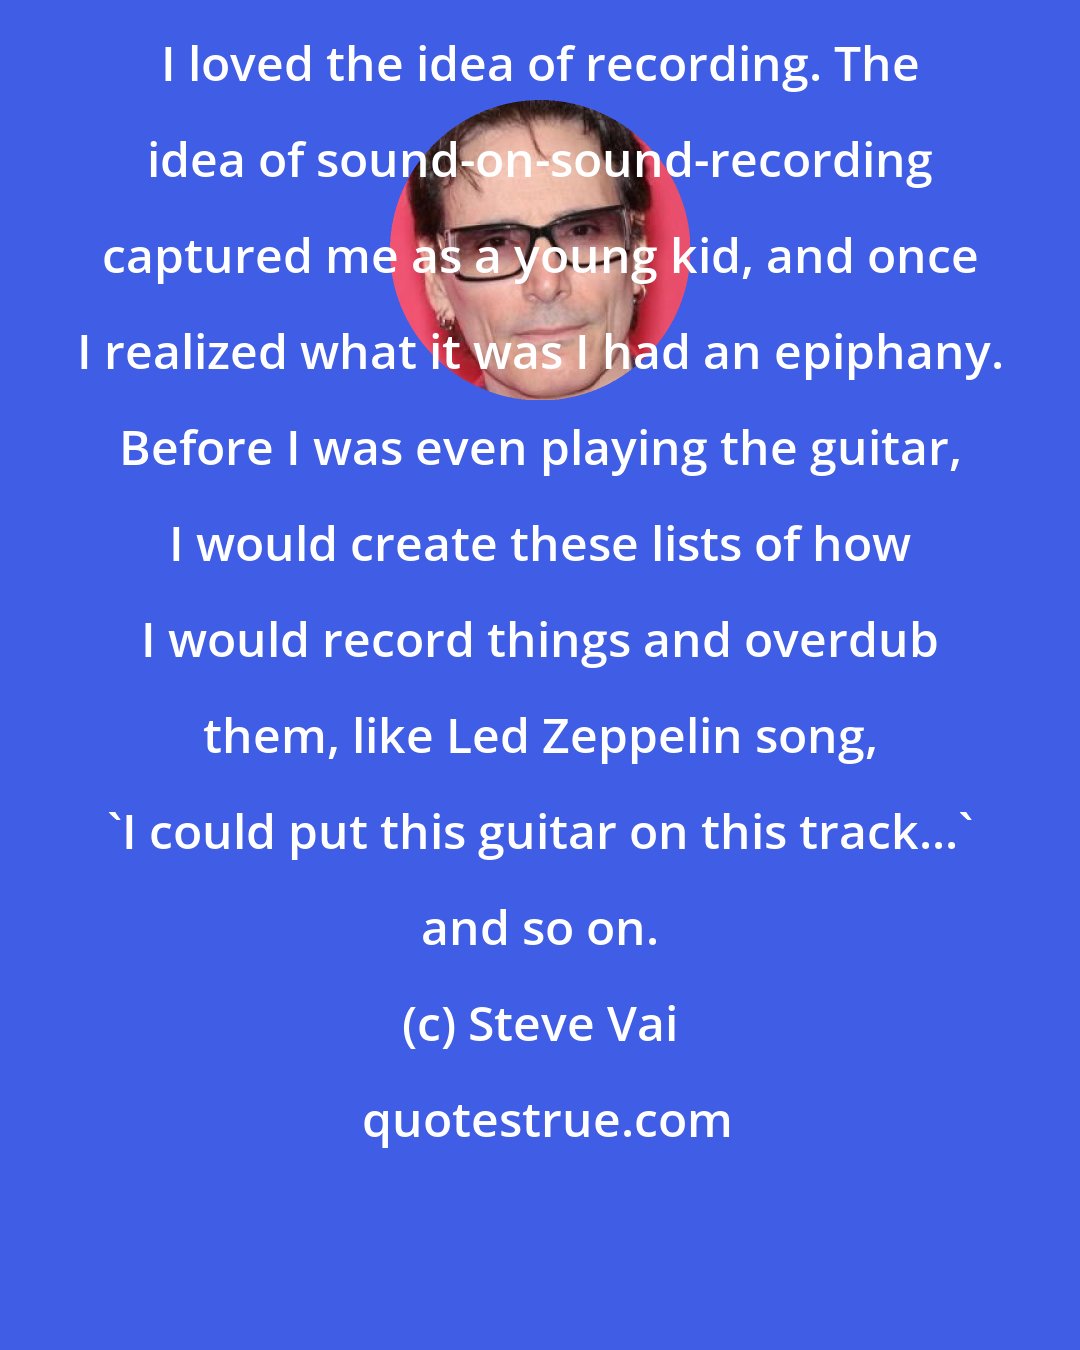 Steve Vai: I loved the idea of recording. The idea of sound-on-sound-recording captured me as a young kid, and once I realized what it was I had an epiphany. Before I was even playing the guitar, I would create these lists of how I would record things and overdub them, like Led Zeppelin song, 'I could put this guitar on this track...' and so on.